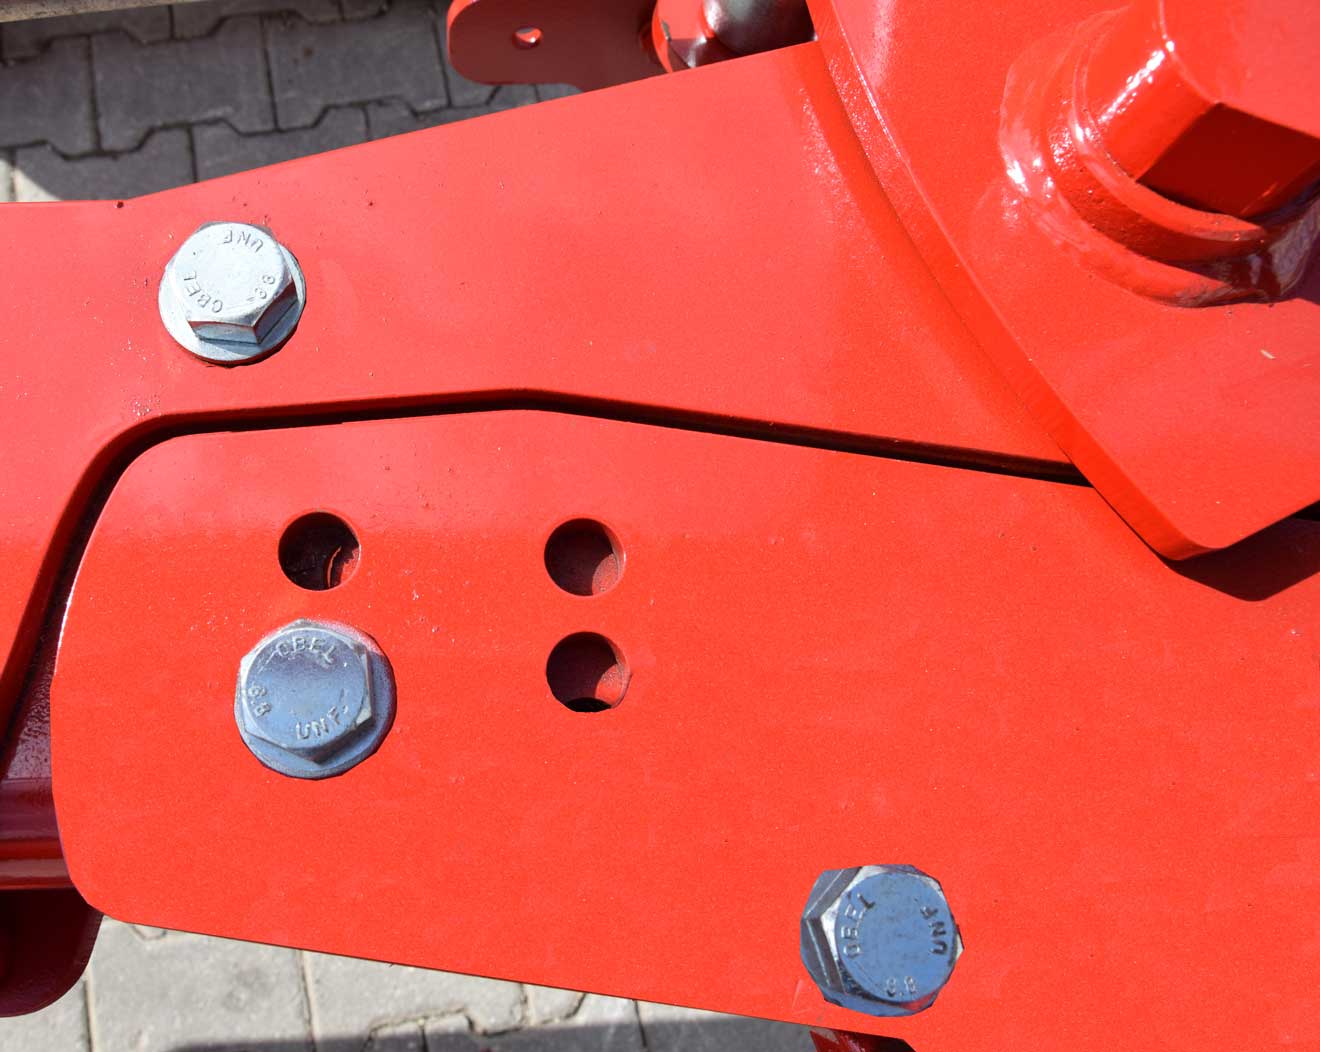 All our rotary plows have mechanical inch adjustment. This plow can be adjusted mechanically to 14-16-18 inches.